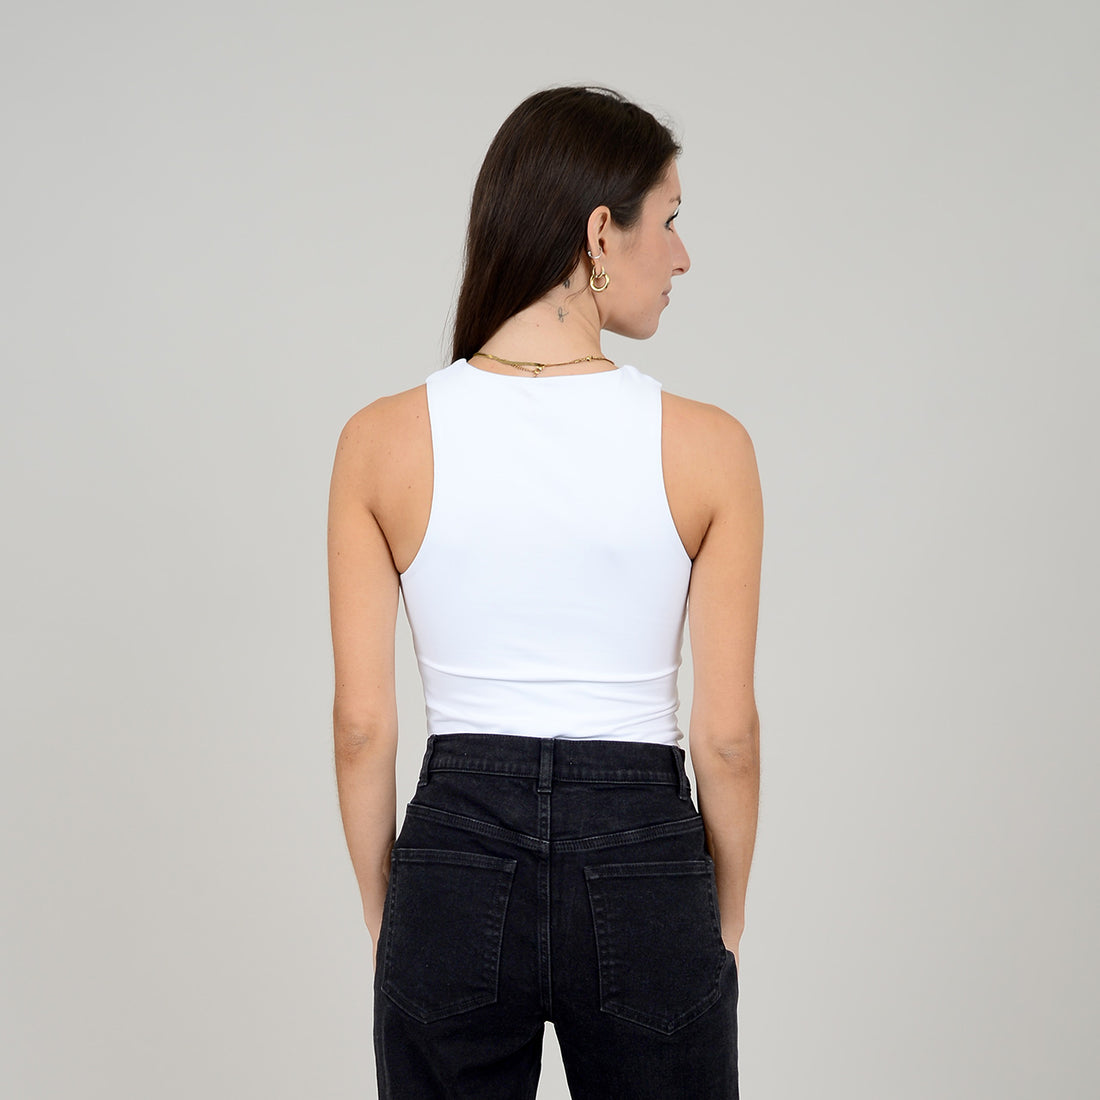 Camisole - Maria muscle